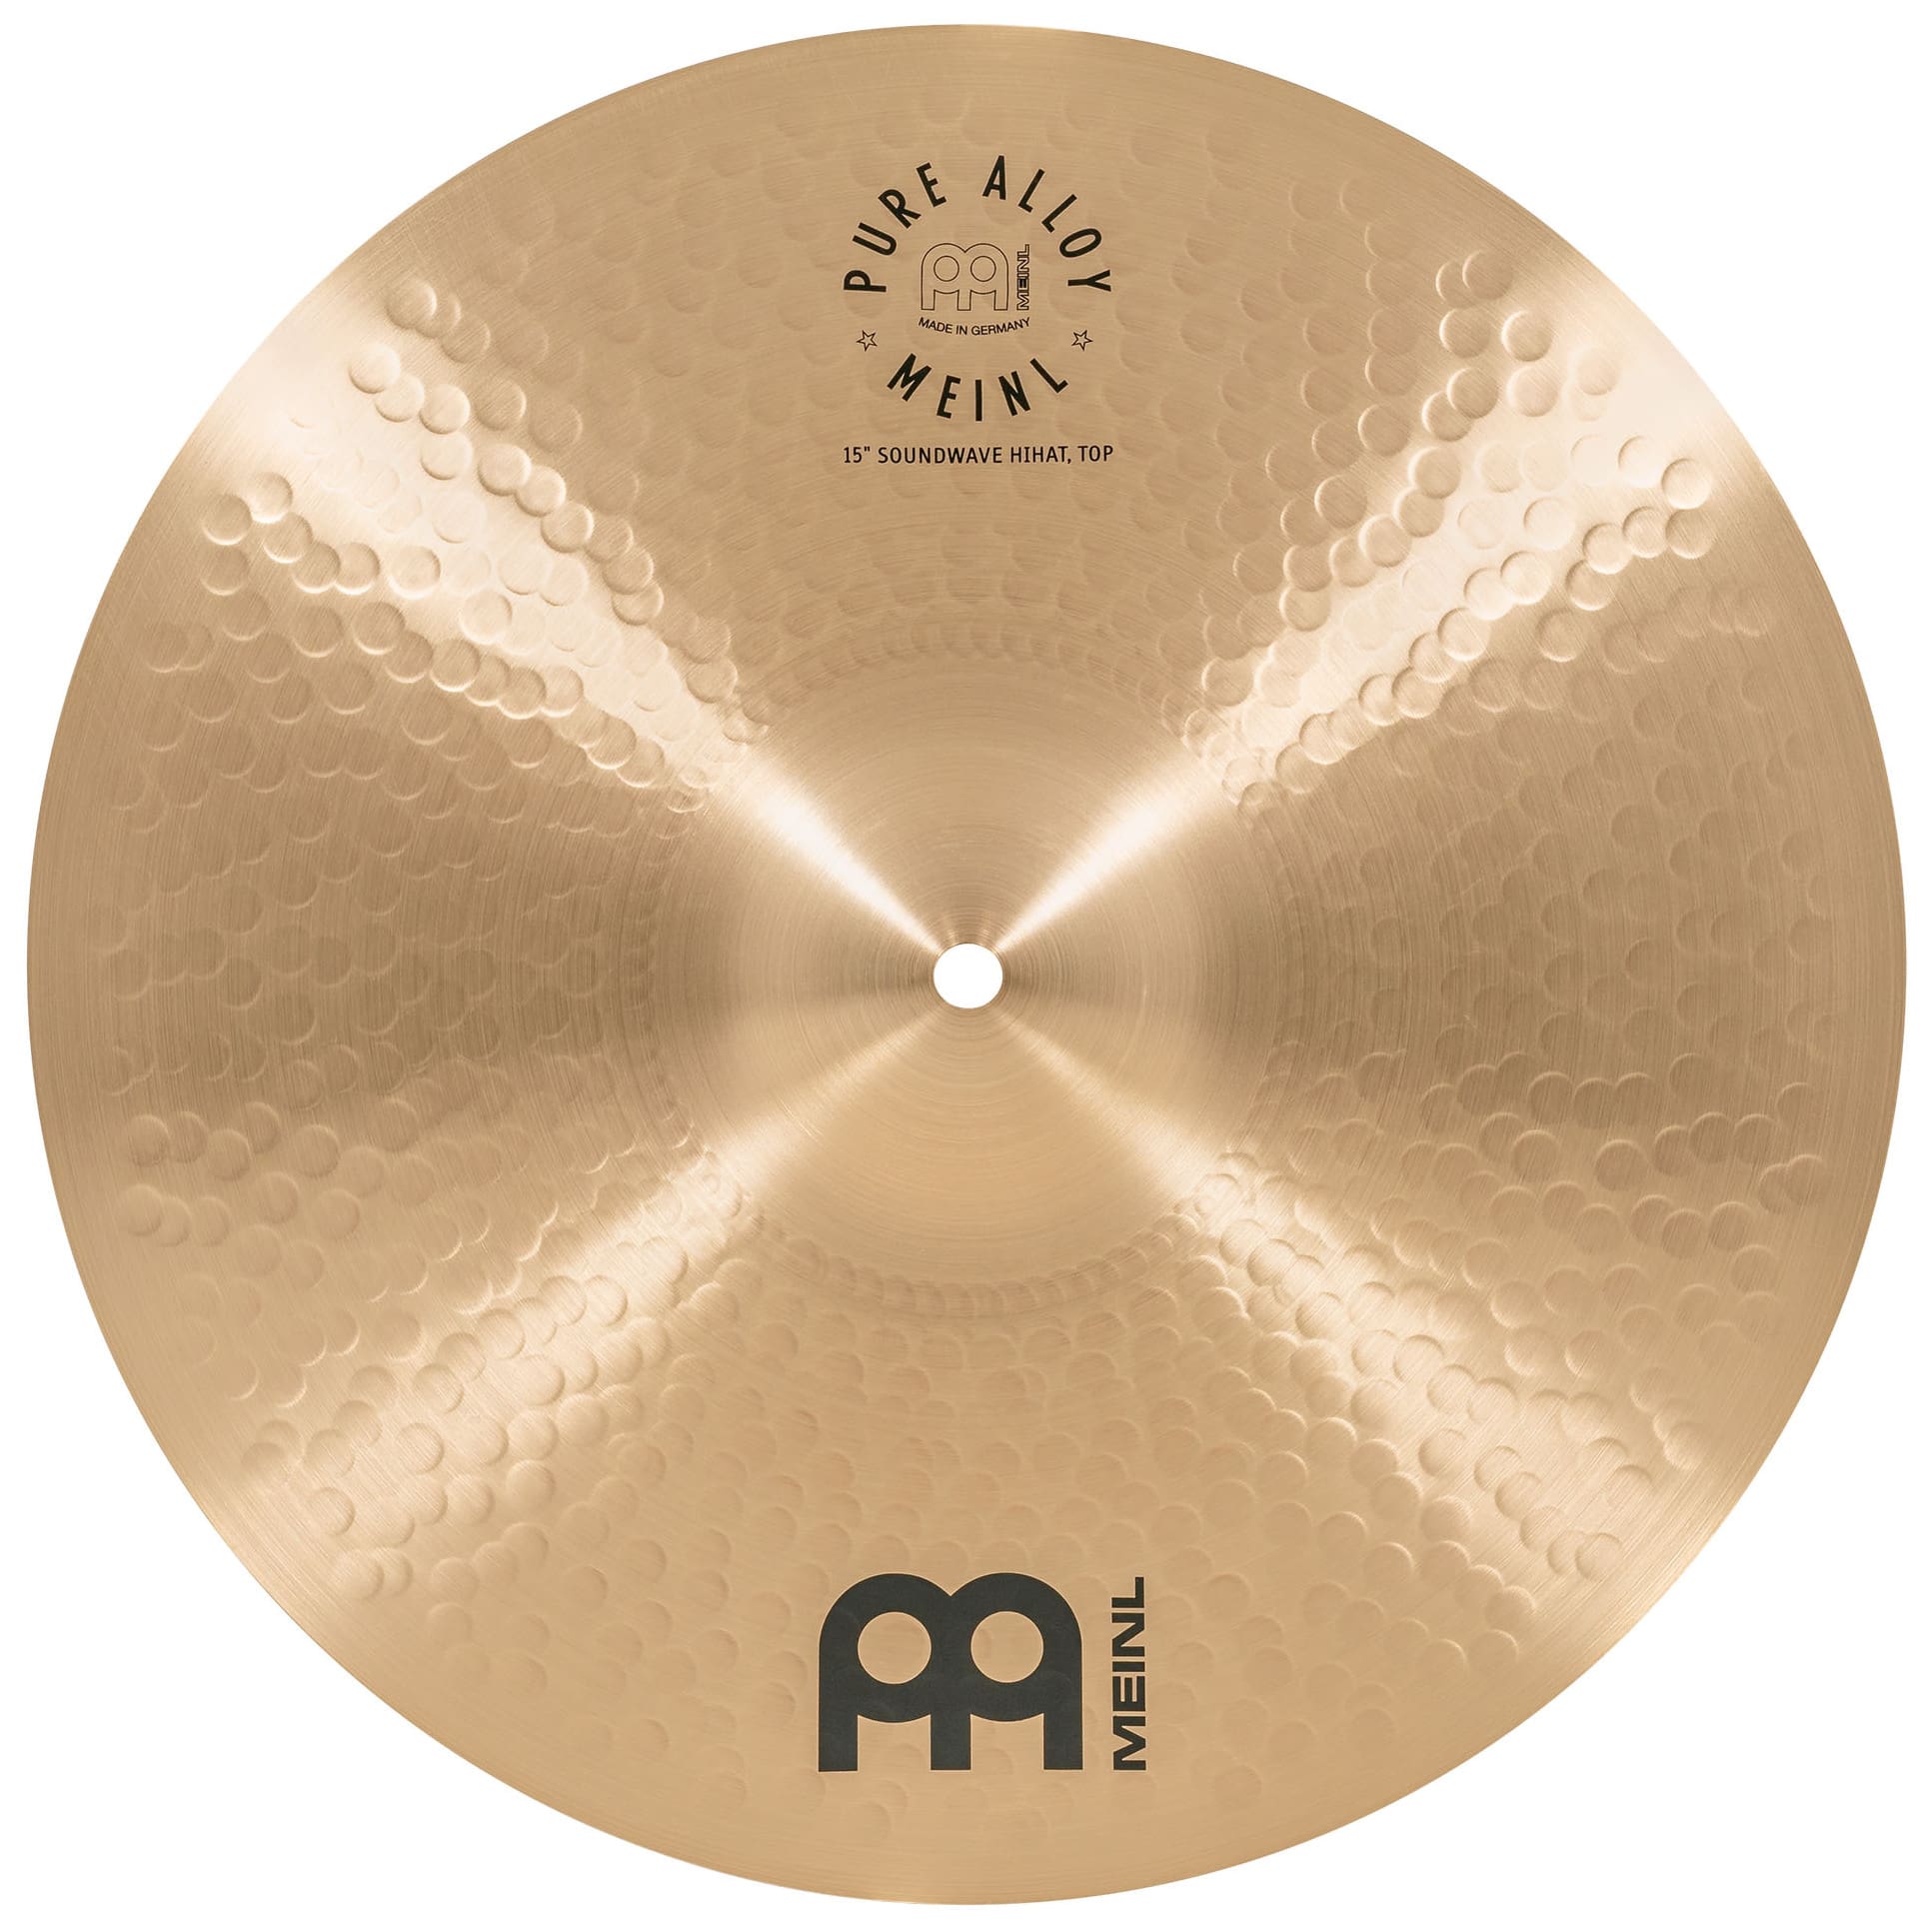 Meinl Cymbals PA15SWH - 15" Pure Alloy Soundwave Hihat 7